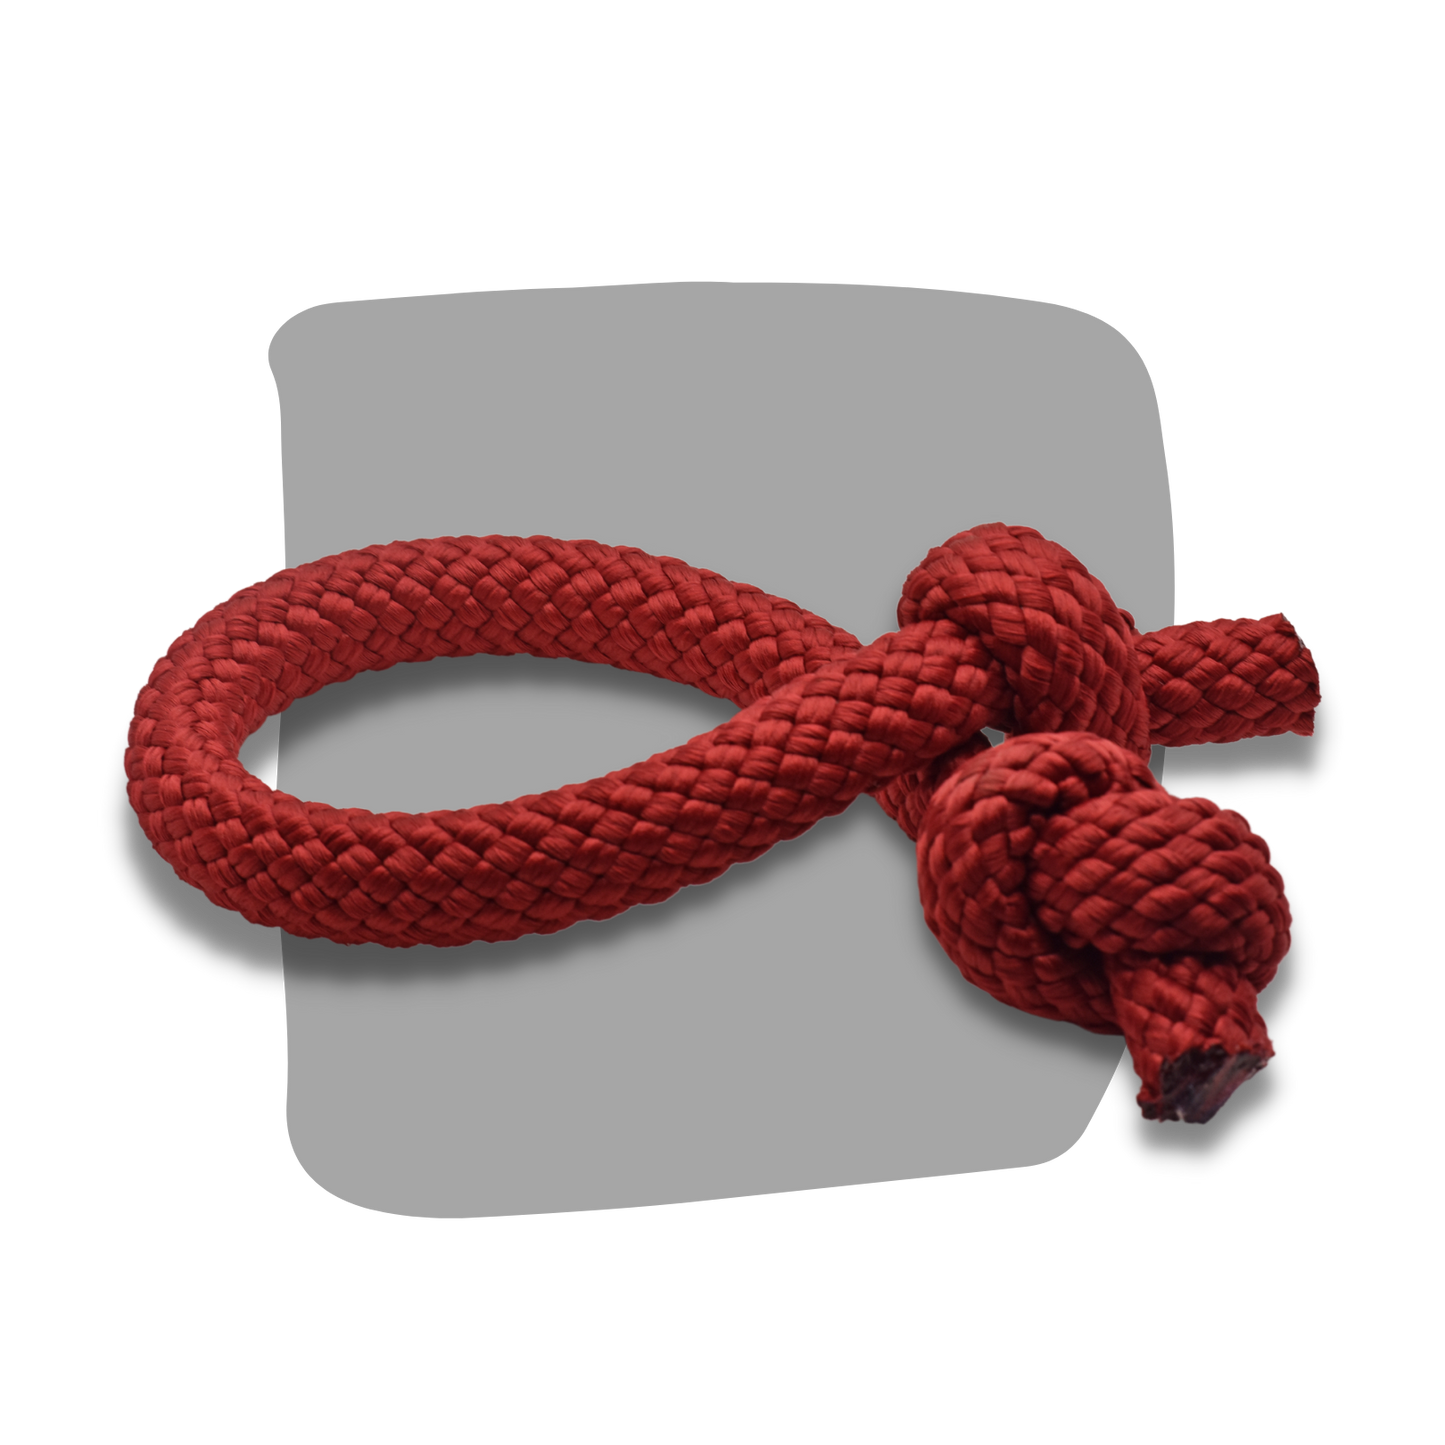 Super Thick Rope Tug Toy